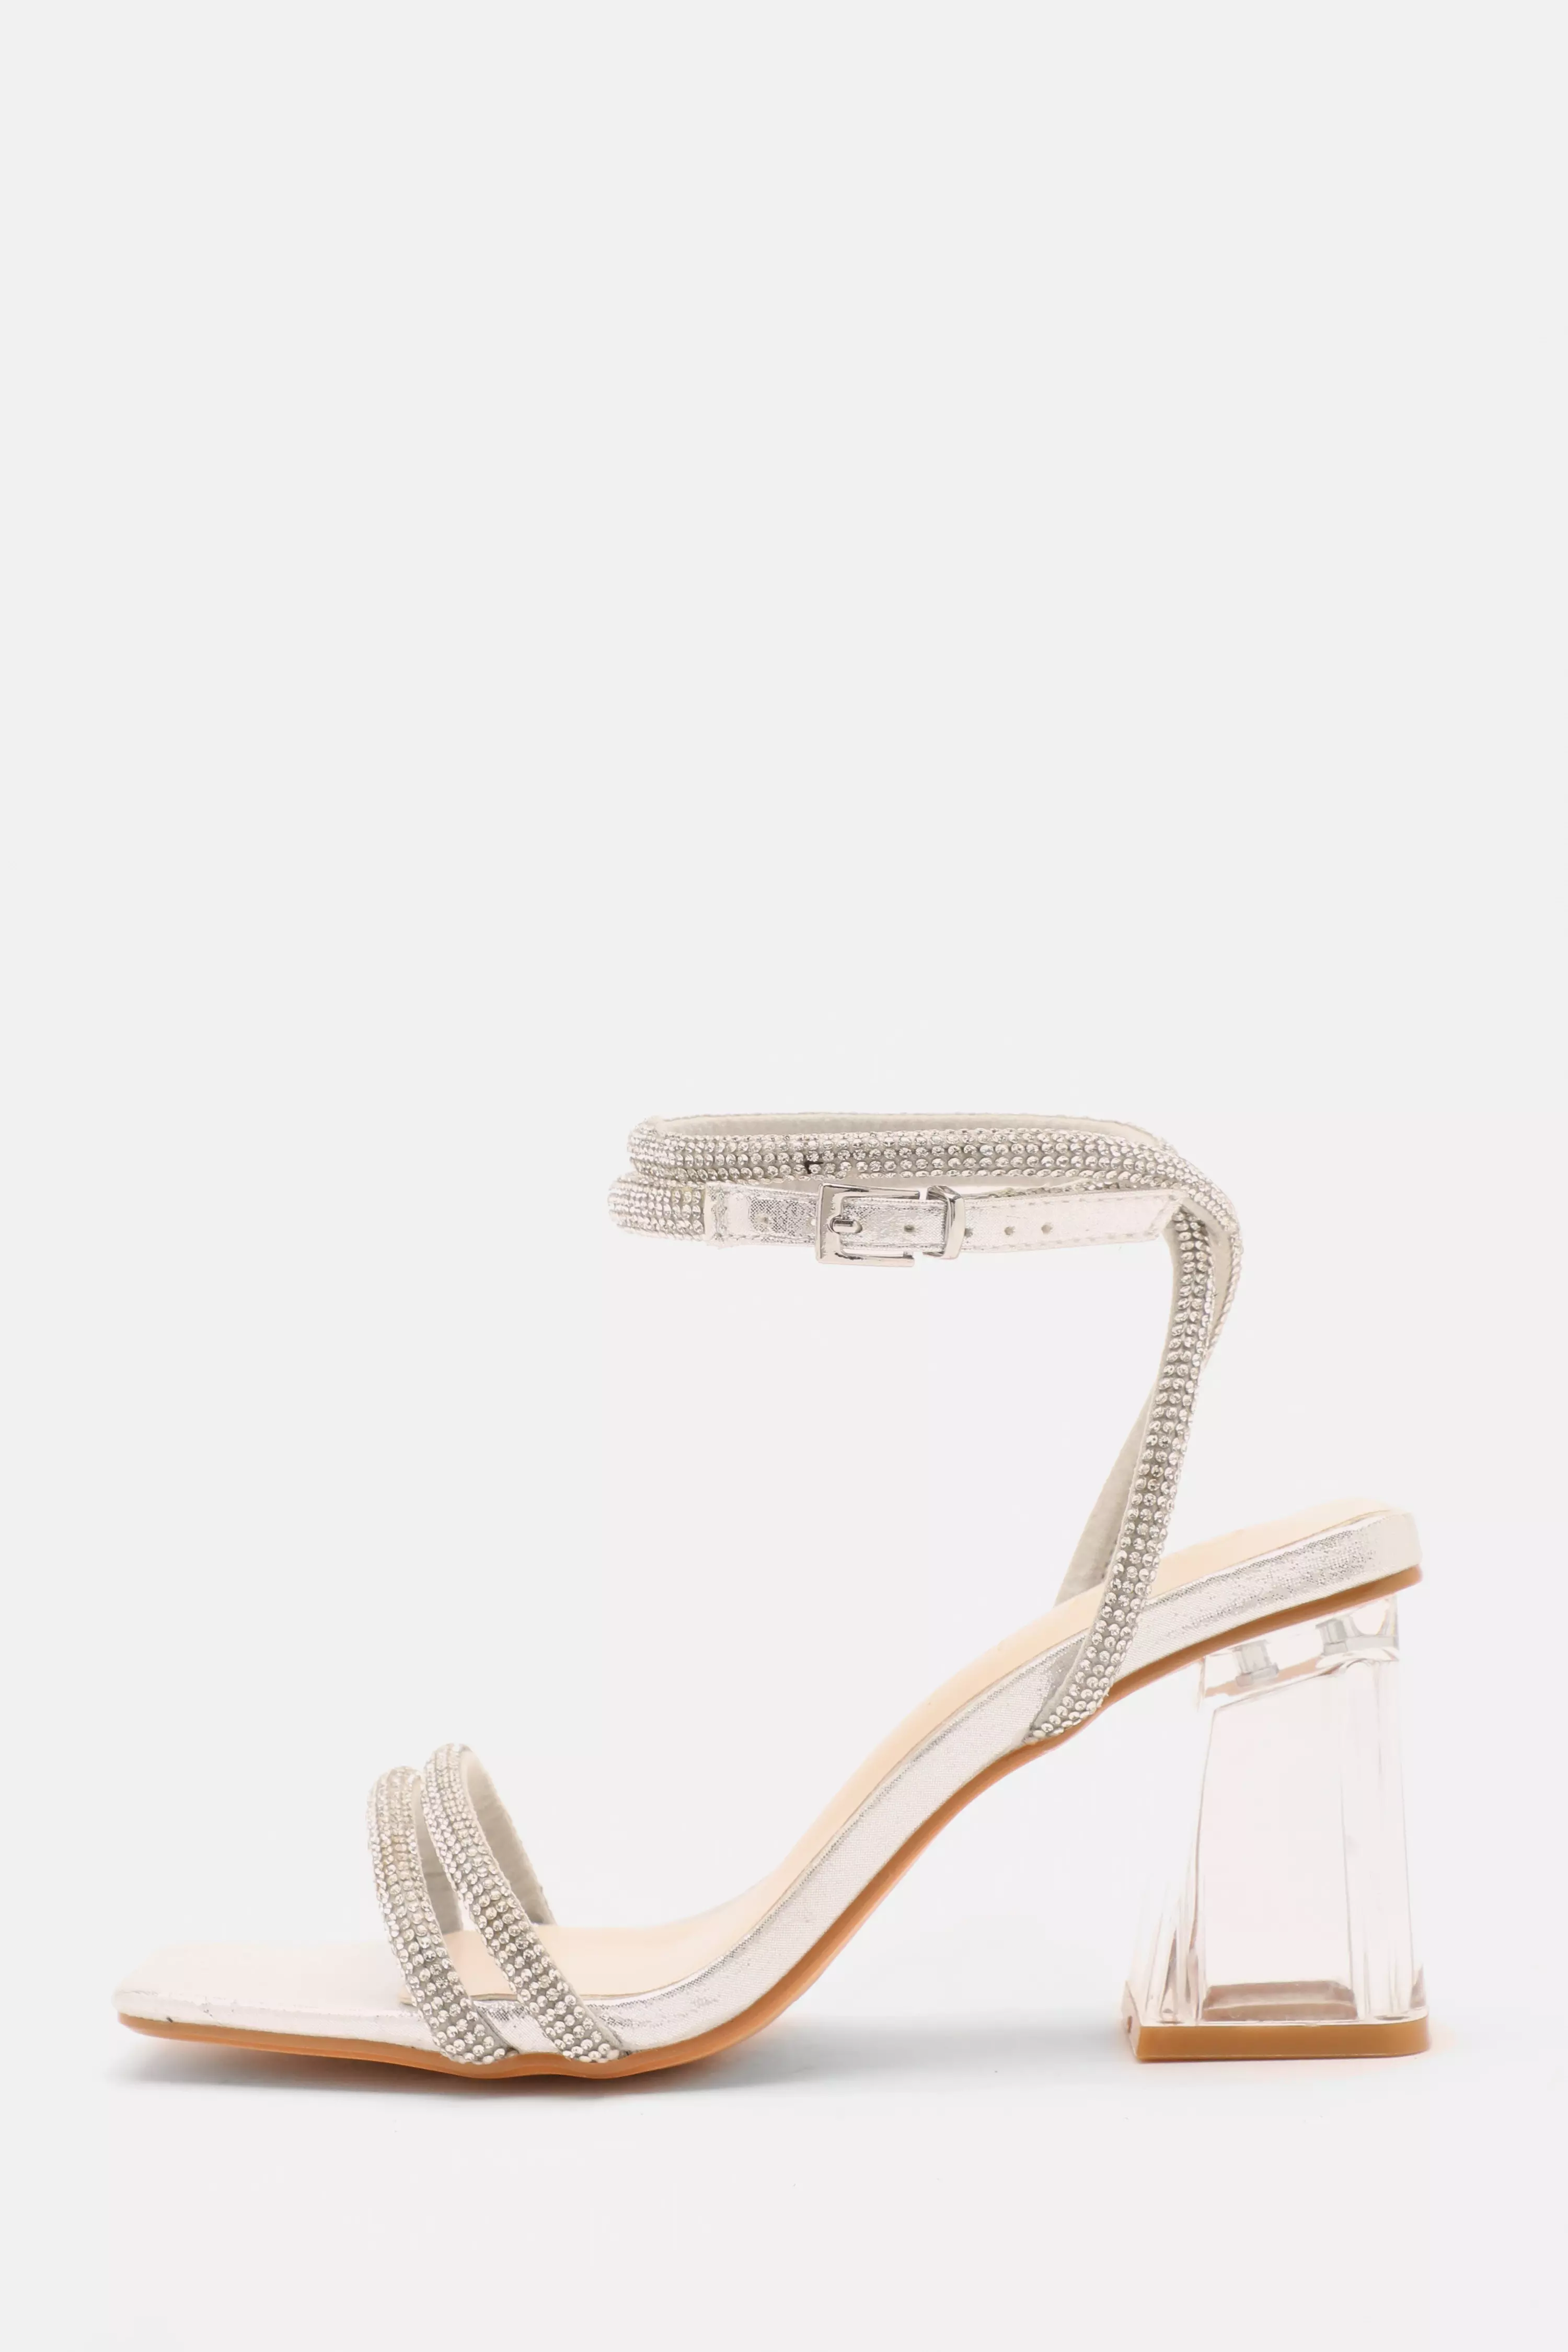 Wide Fit Silver Diamante Clear Block Heeled Sandals